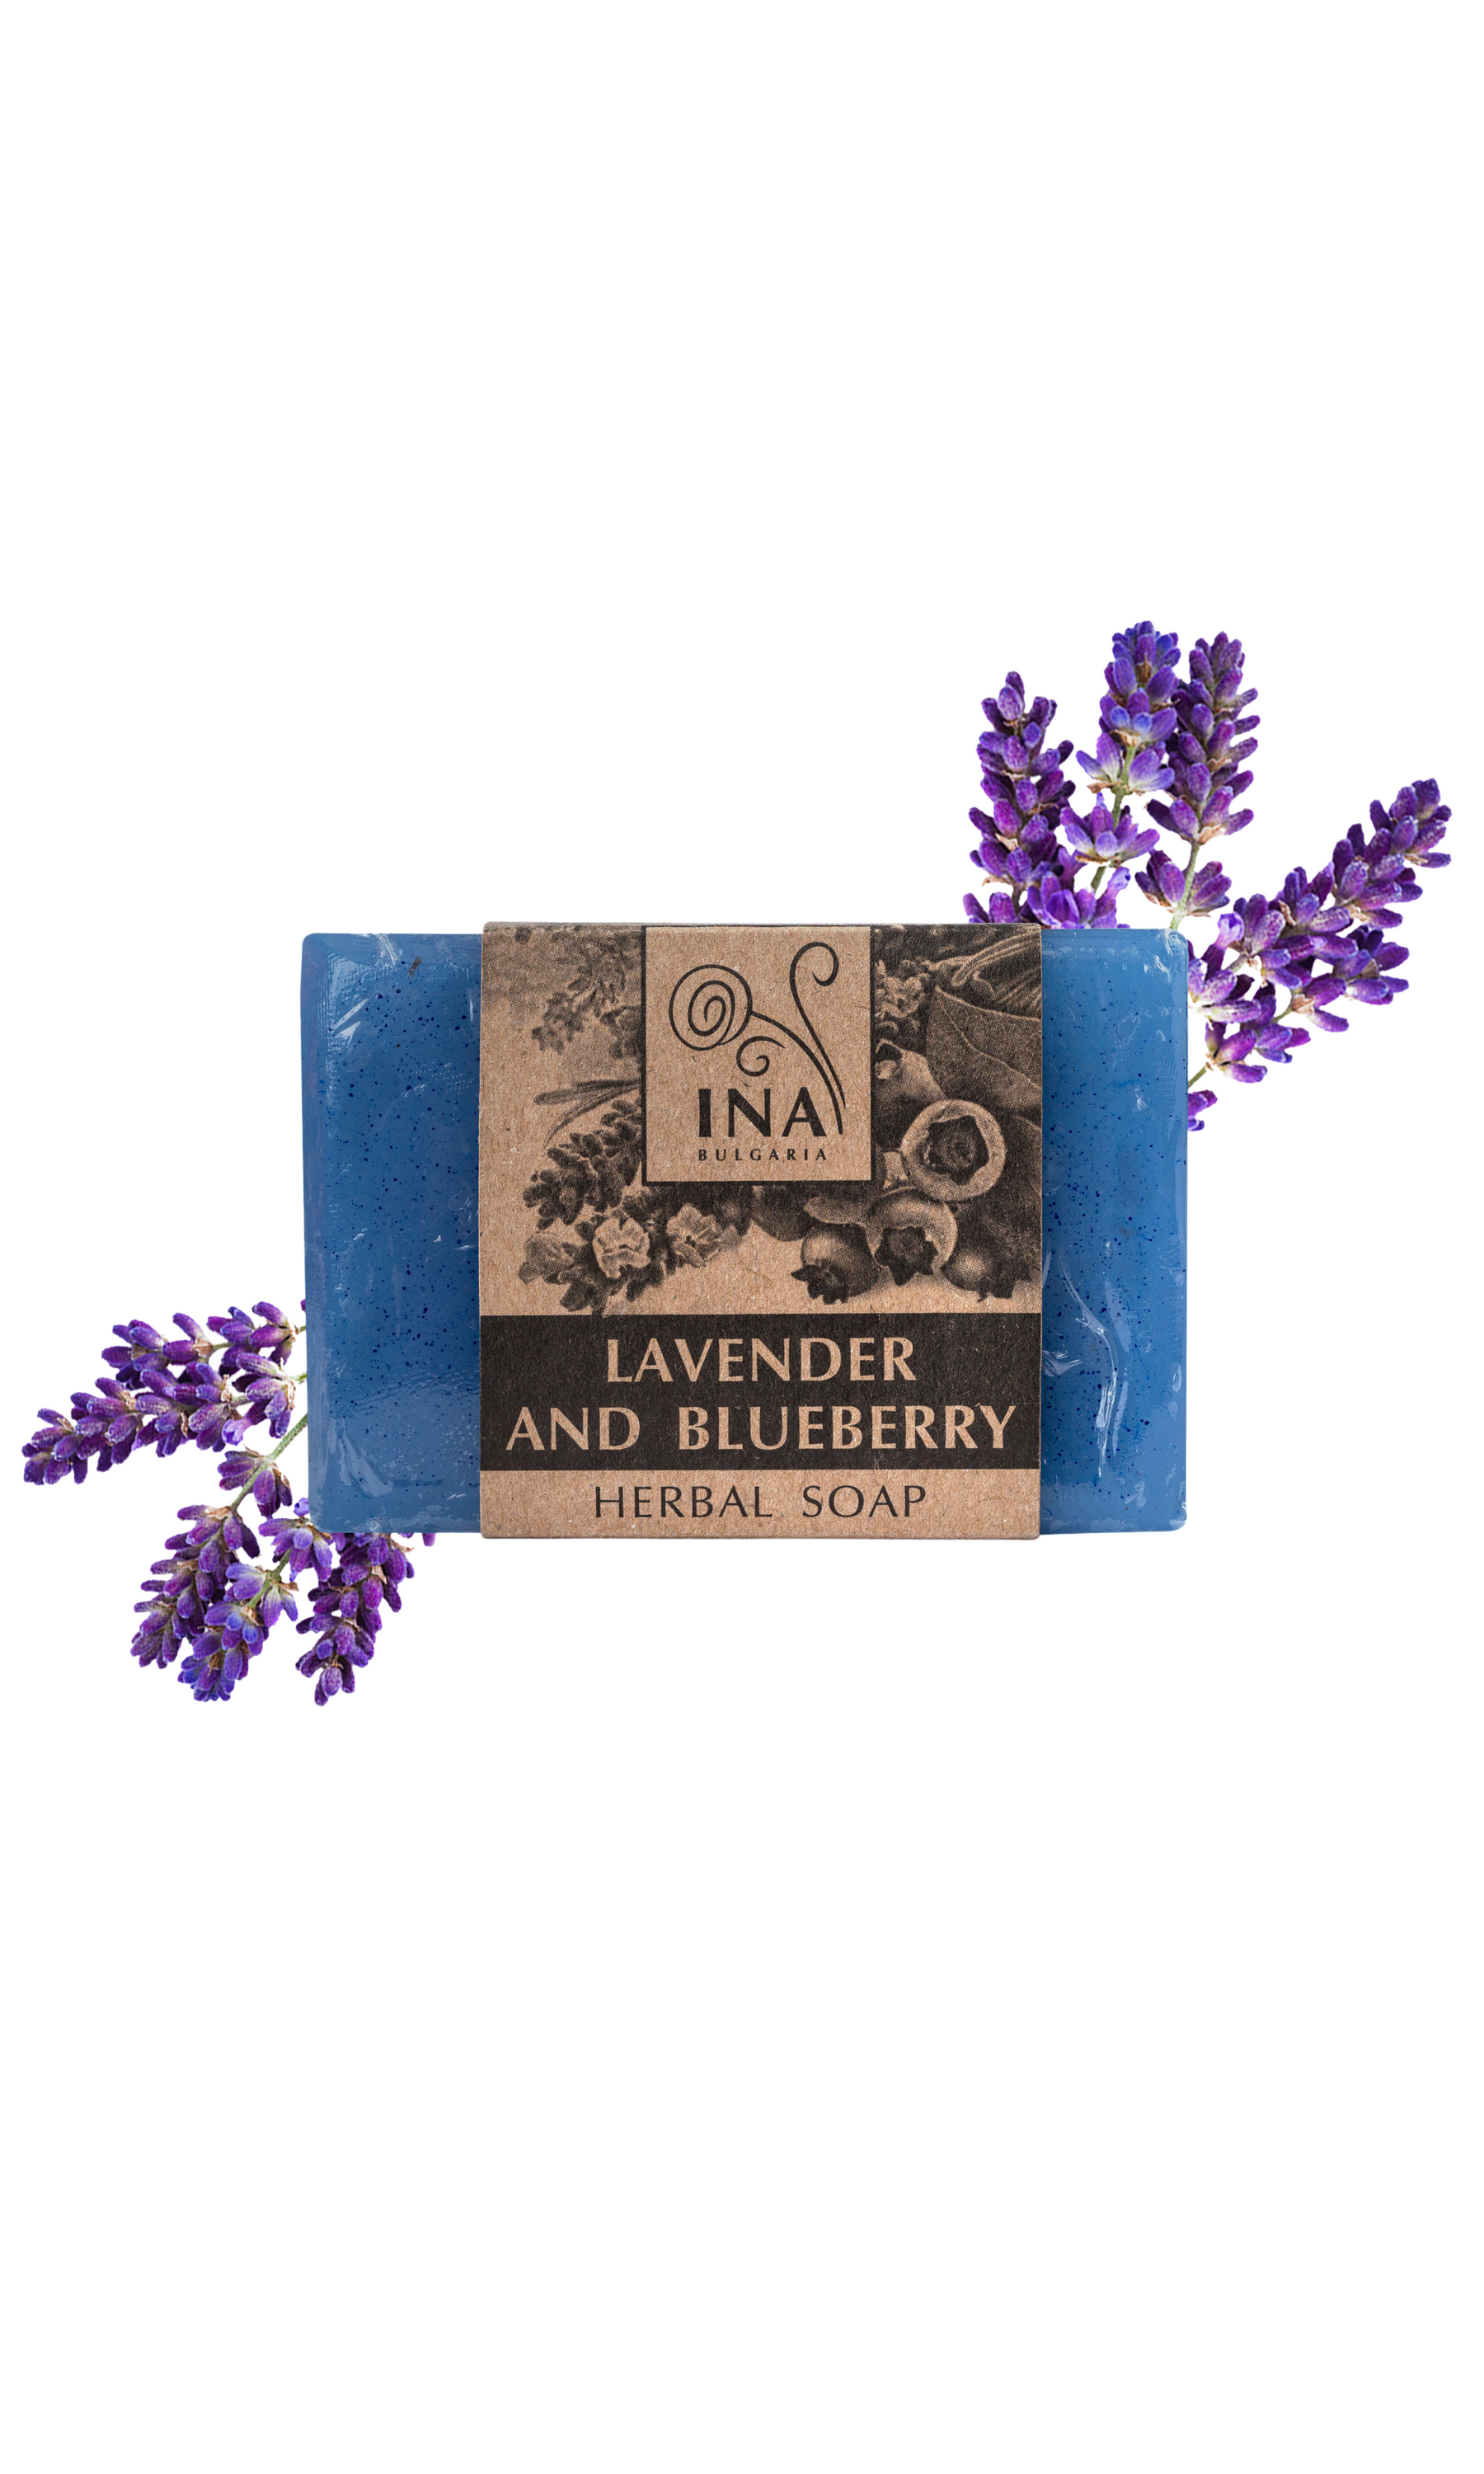 100% Herbal Soap-Lavender and Blueberry (4891117813807)